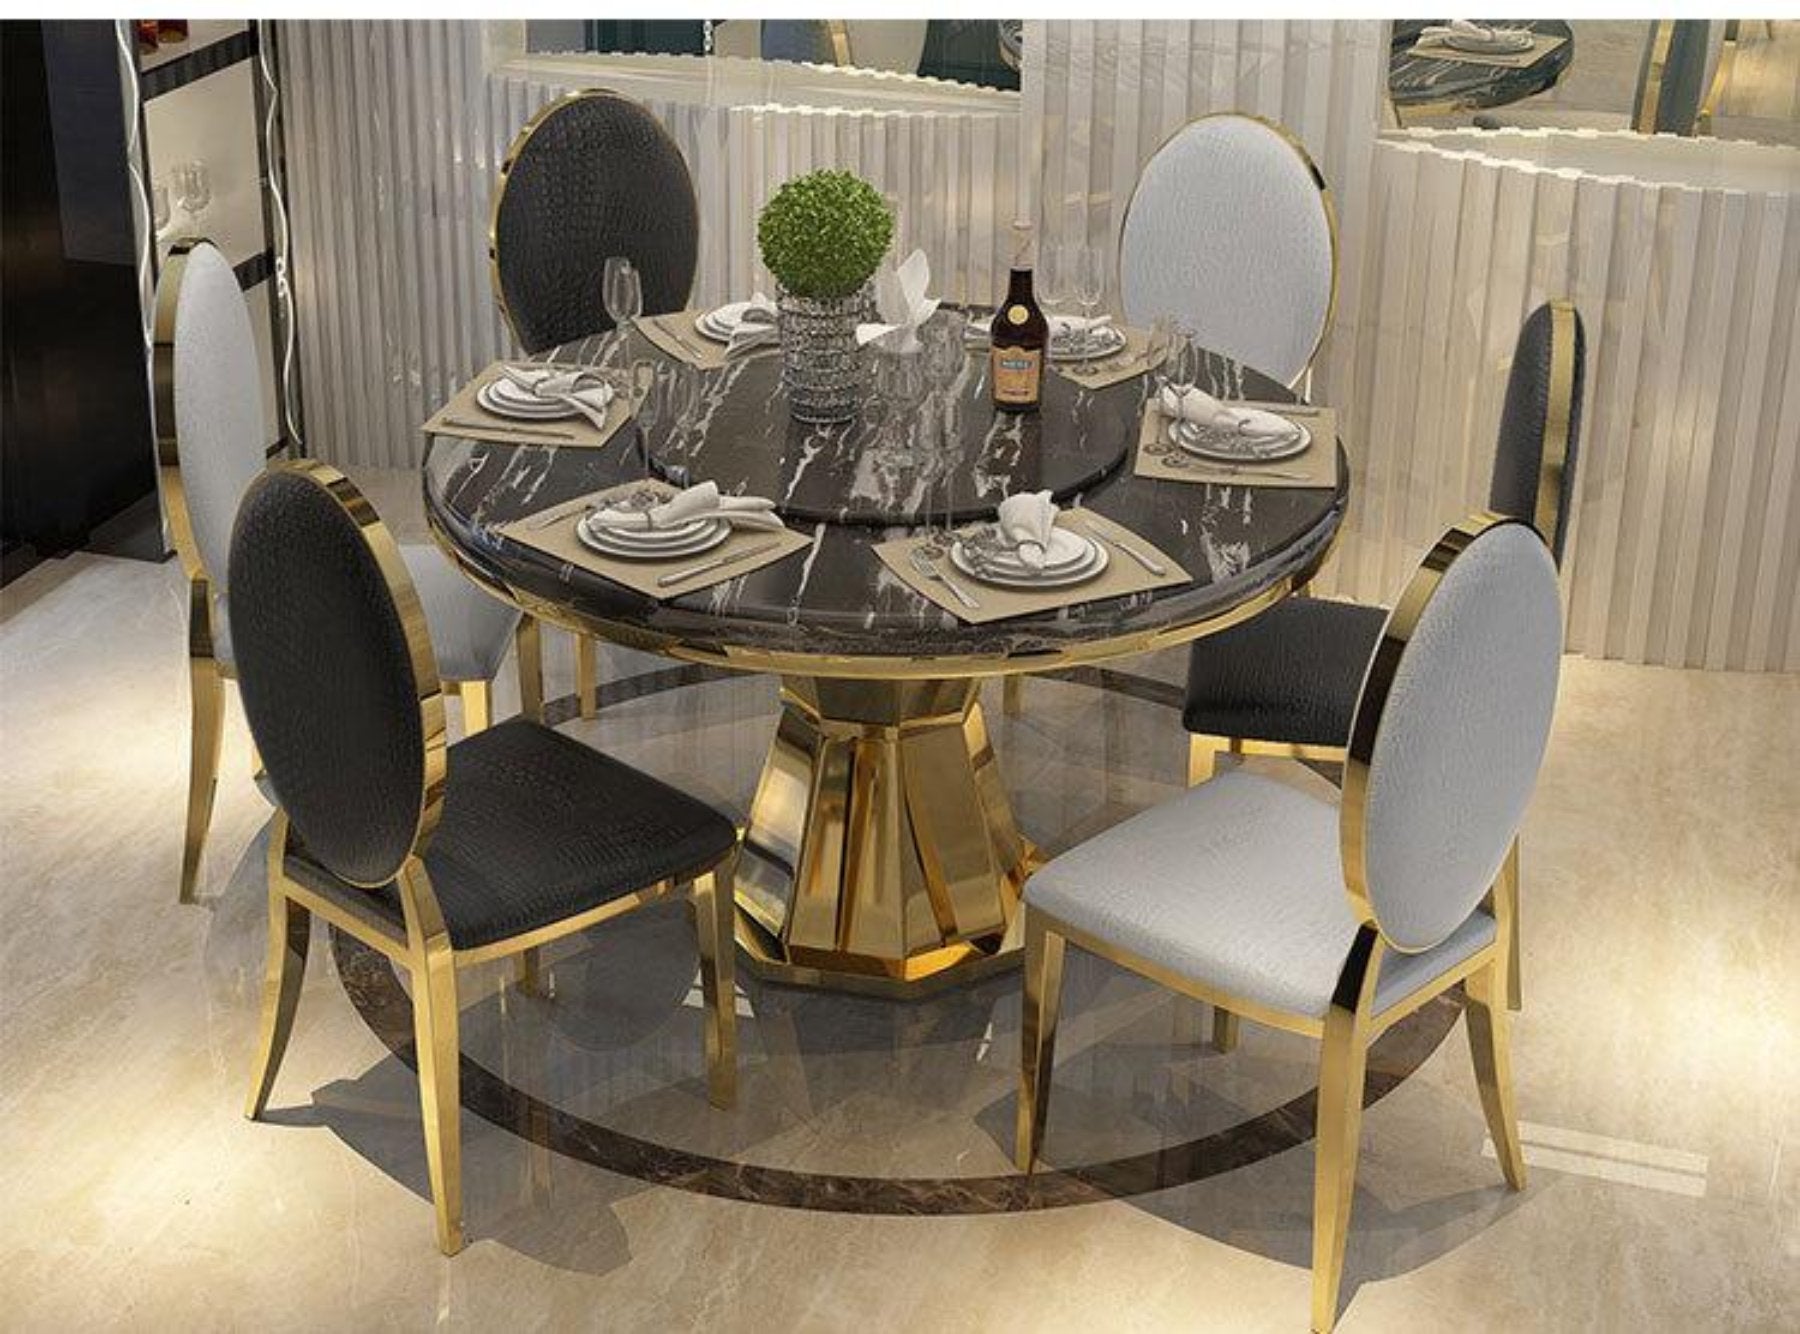 Stainless Steel Dining Room Set Home Furniture Minimalist Modern Glass Dining Table And 6 Chairs Mesa ?v=1571439396